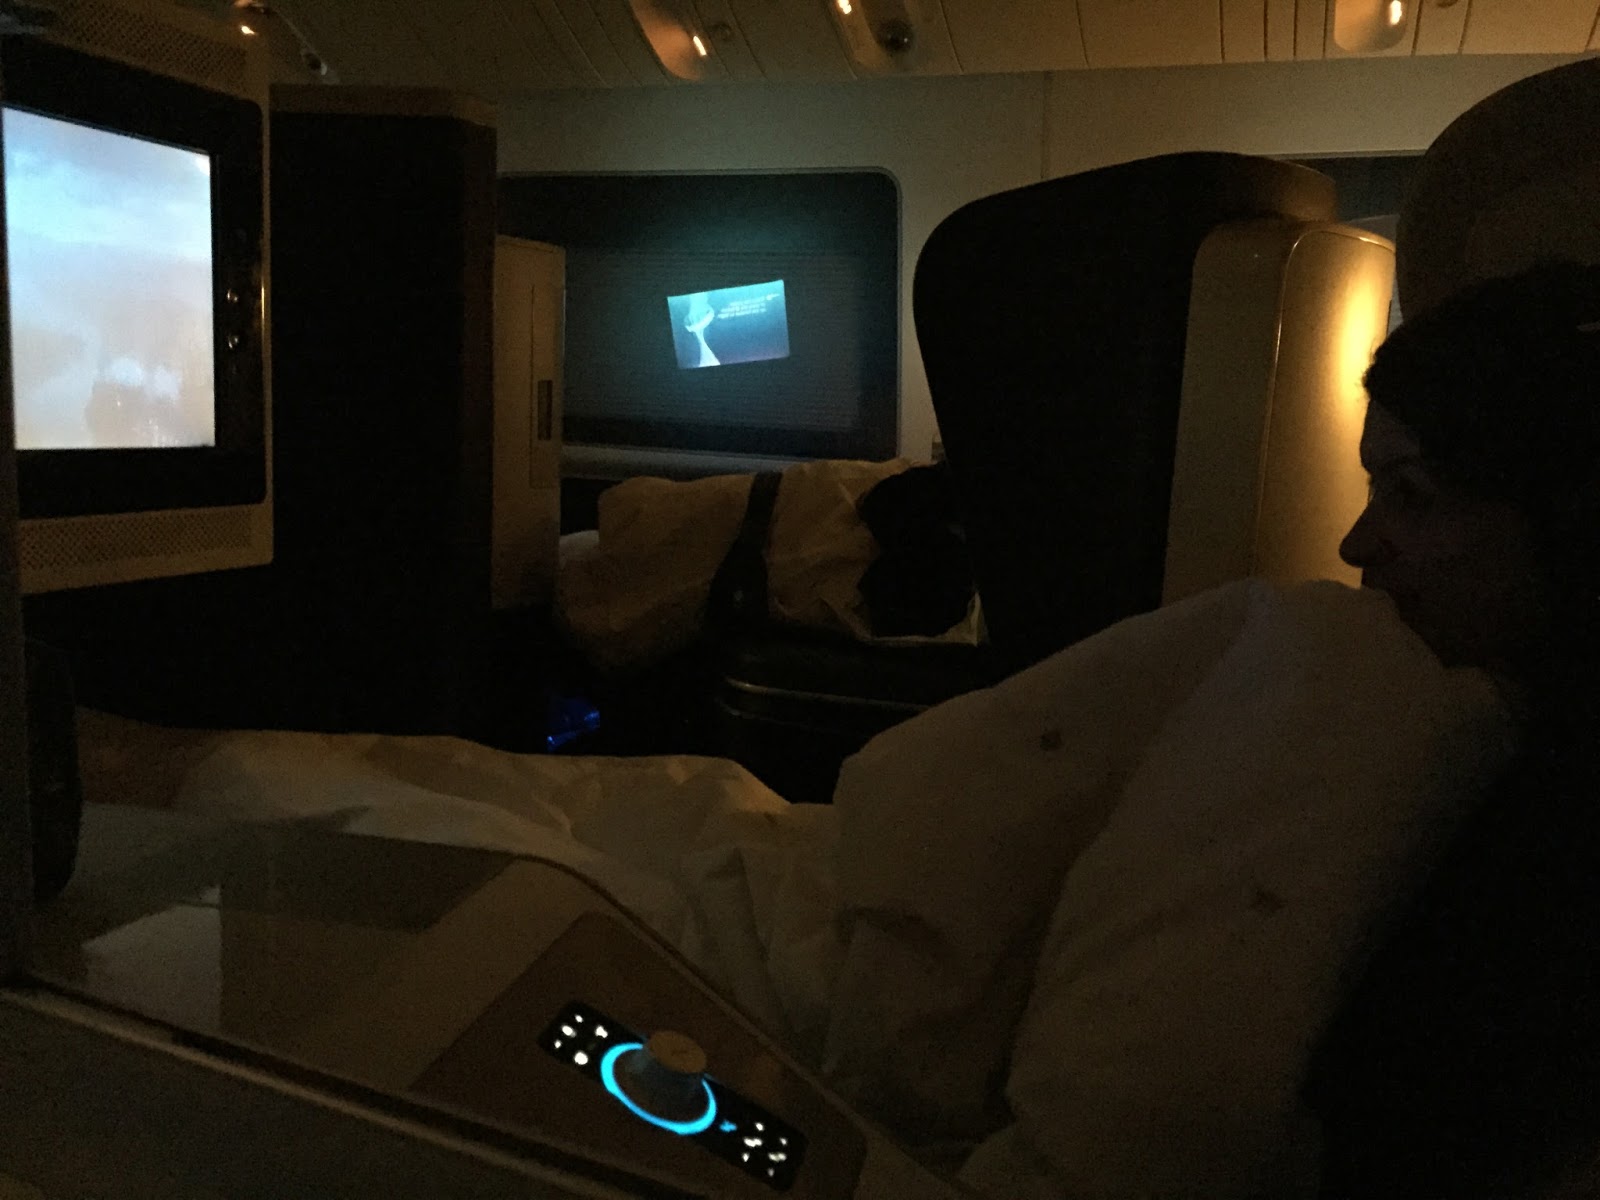 BA First Class seat and screen 